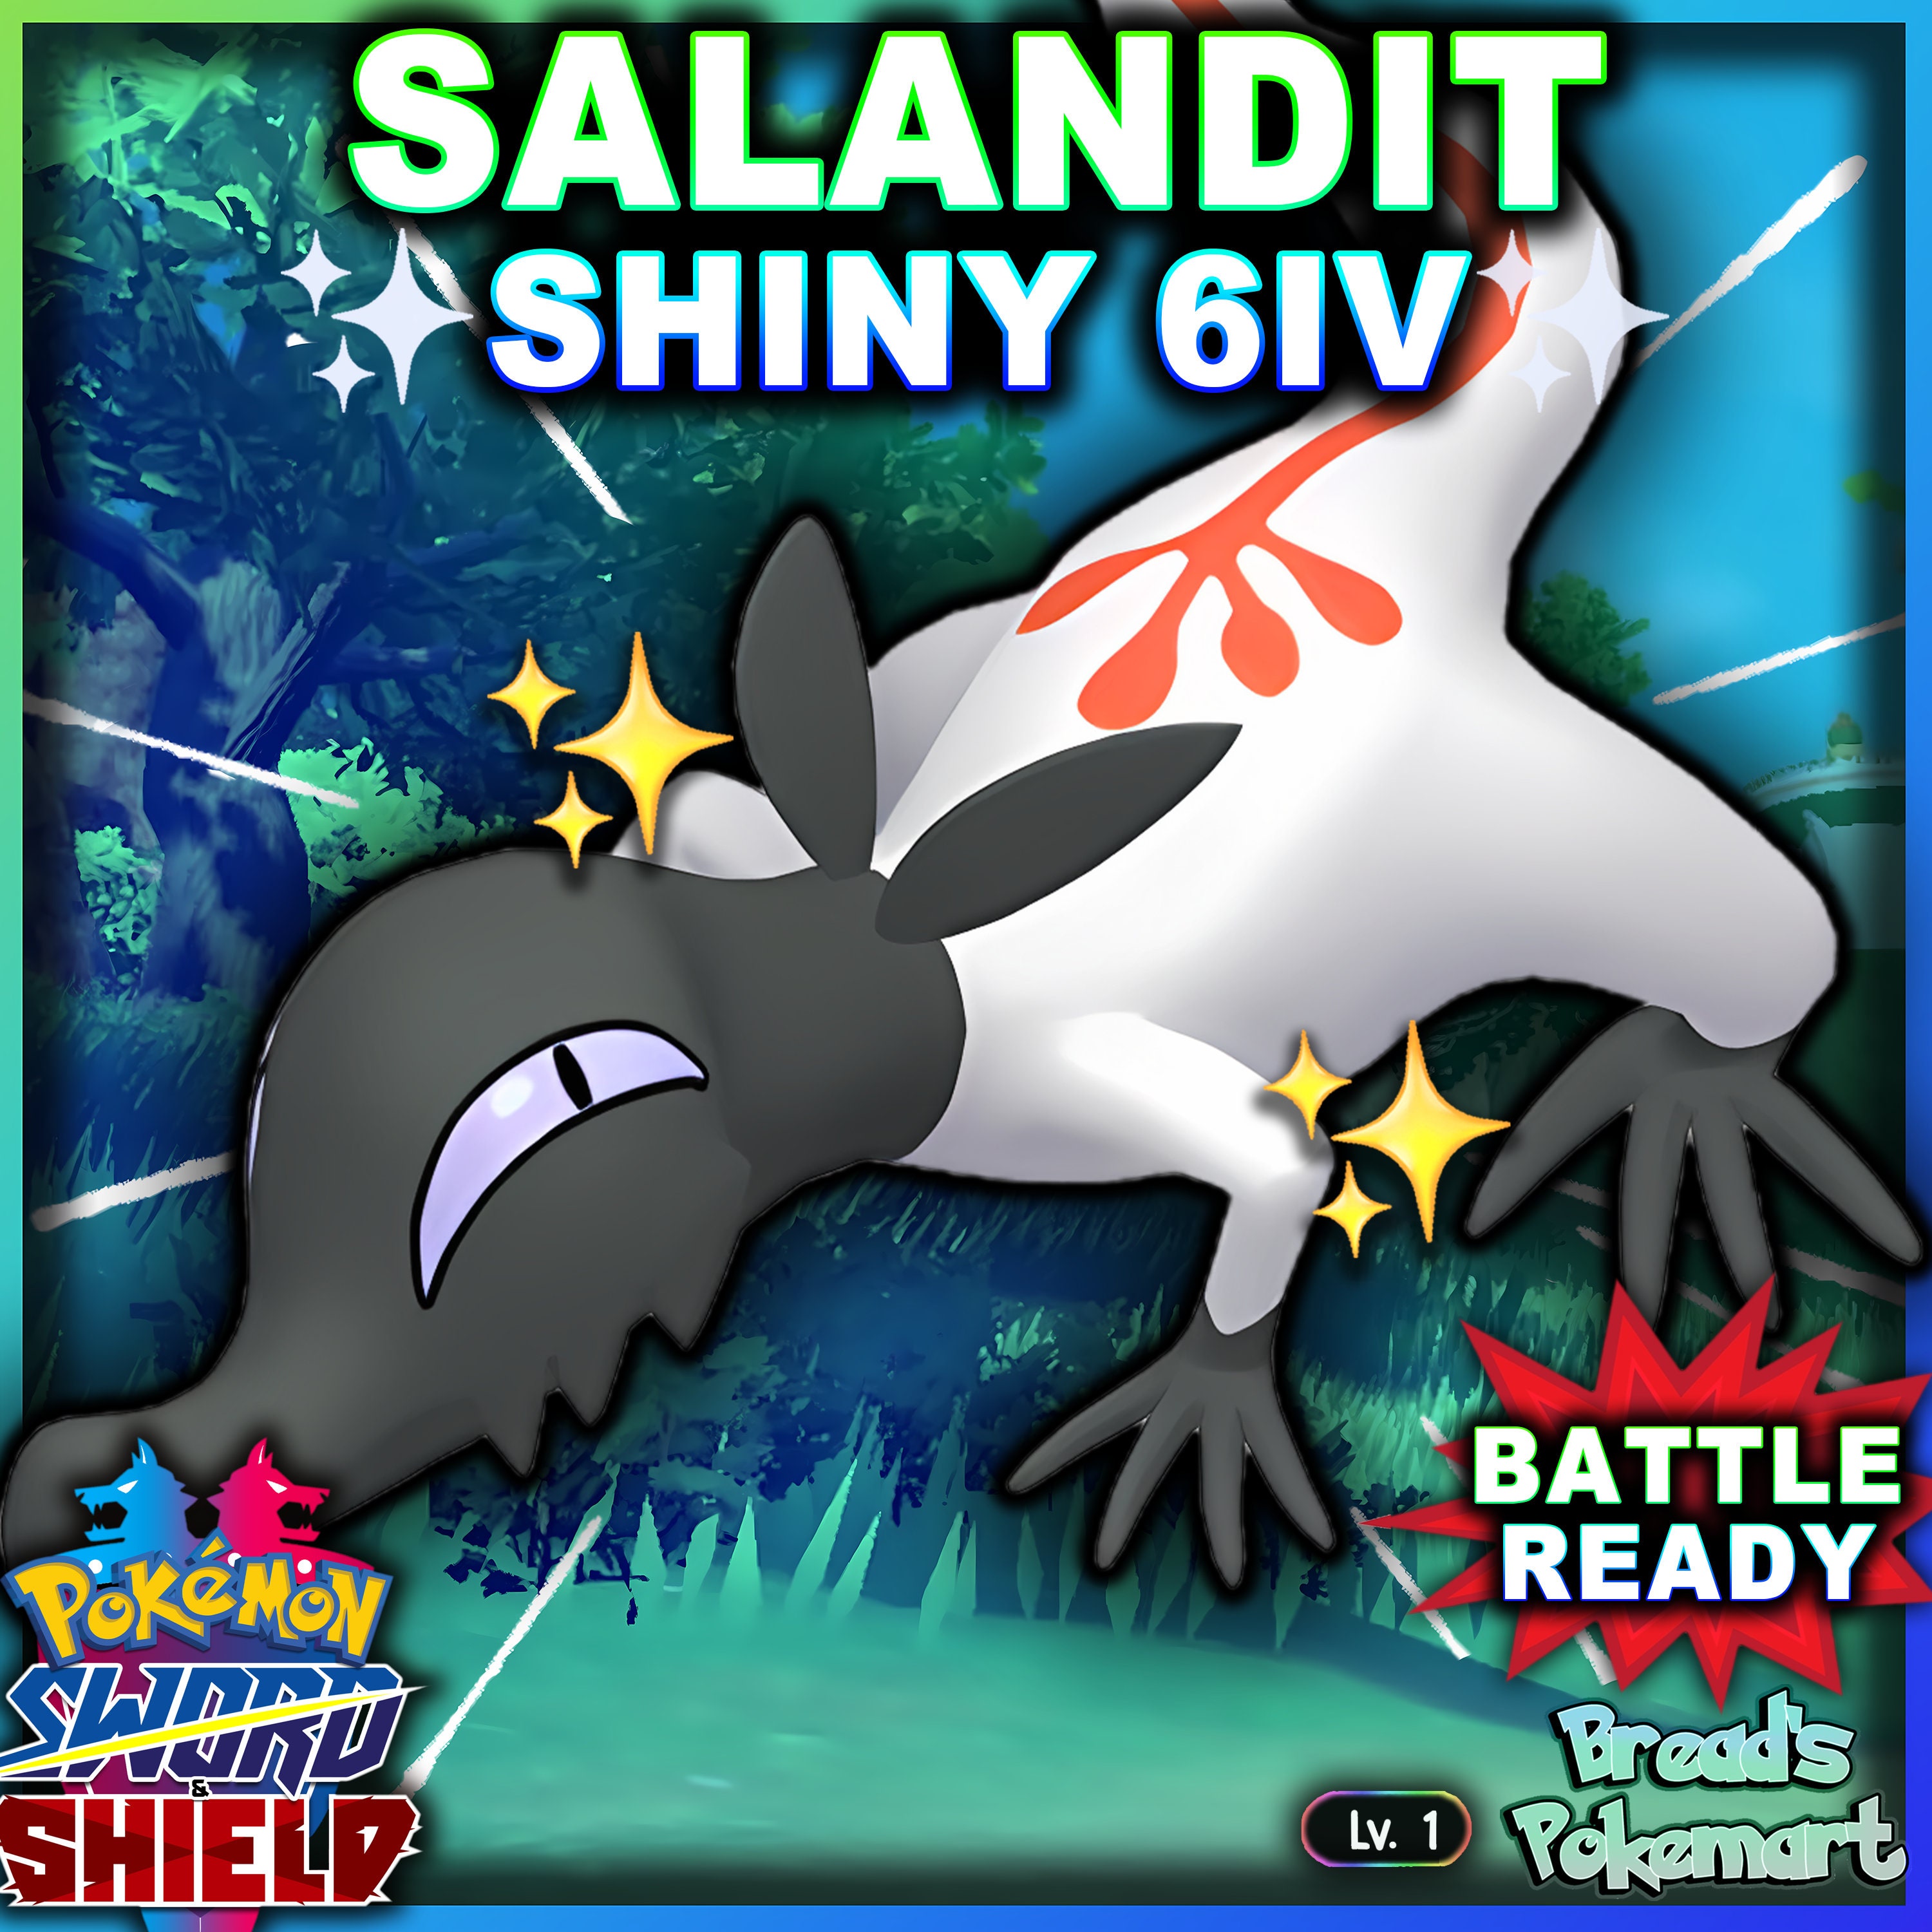 🌟Exclusives Pokemon Scarlet and Violet - 6iv Shiny and Free Master Balls🌟